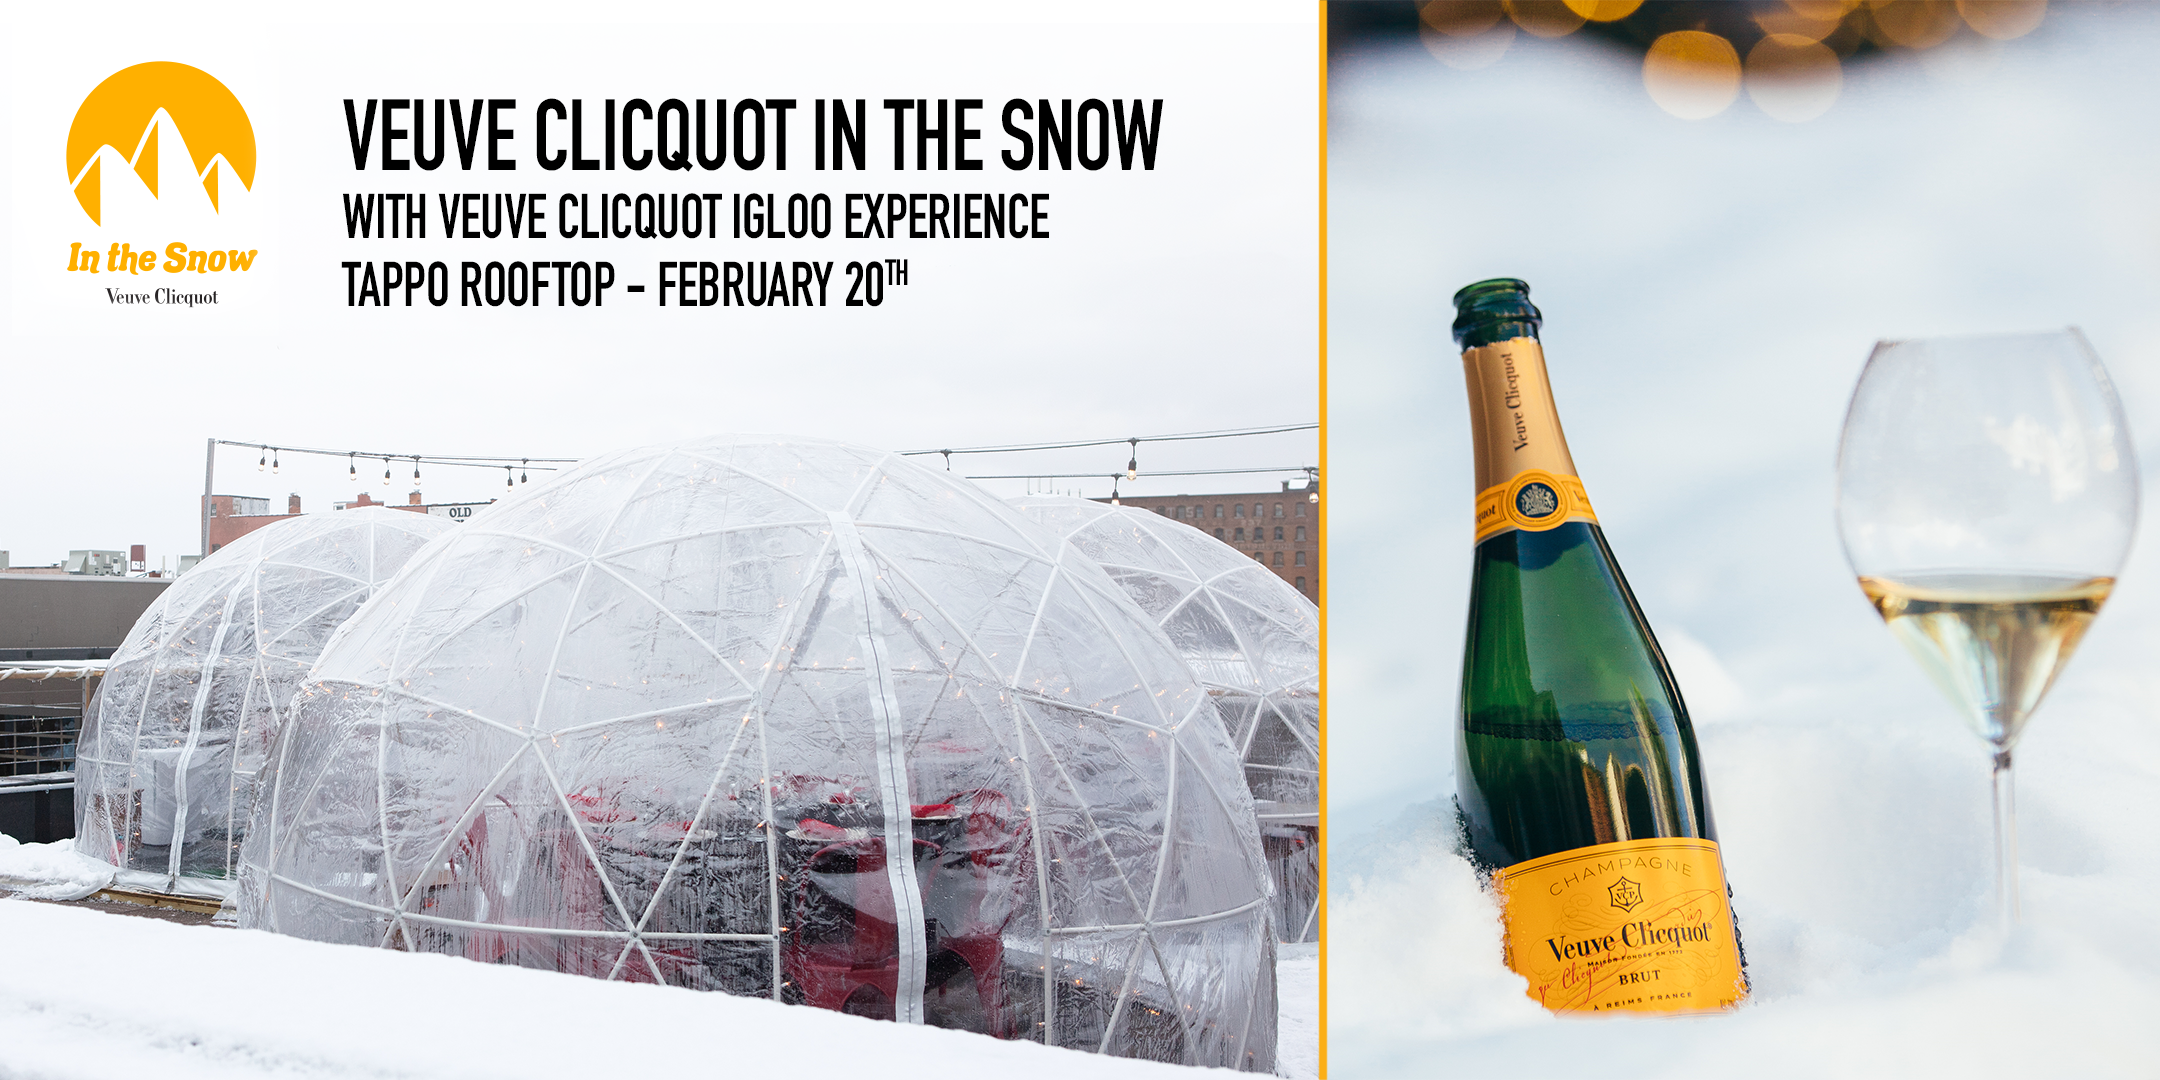 Sunday Day Club: Summer Snow with Veuve Clicquot